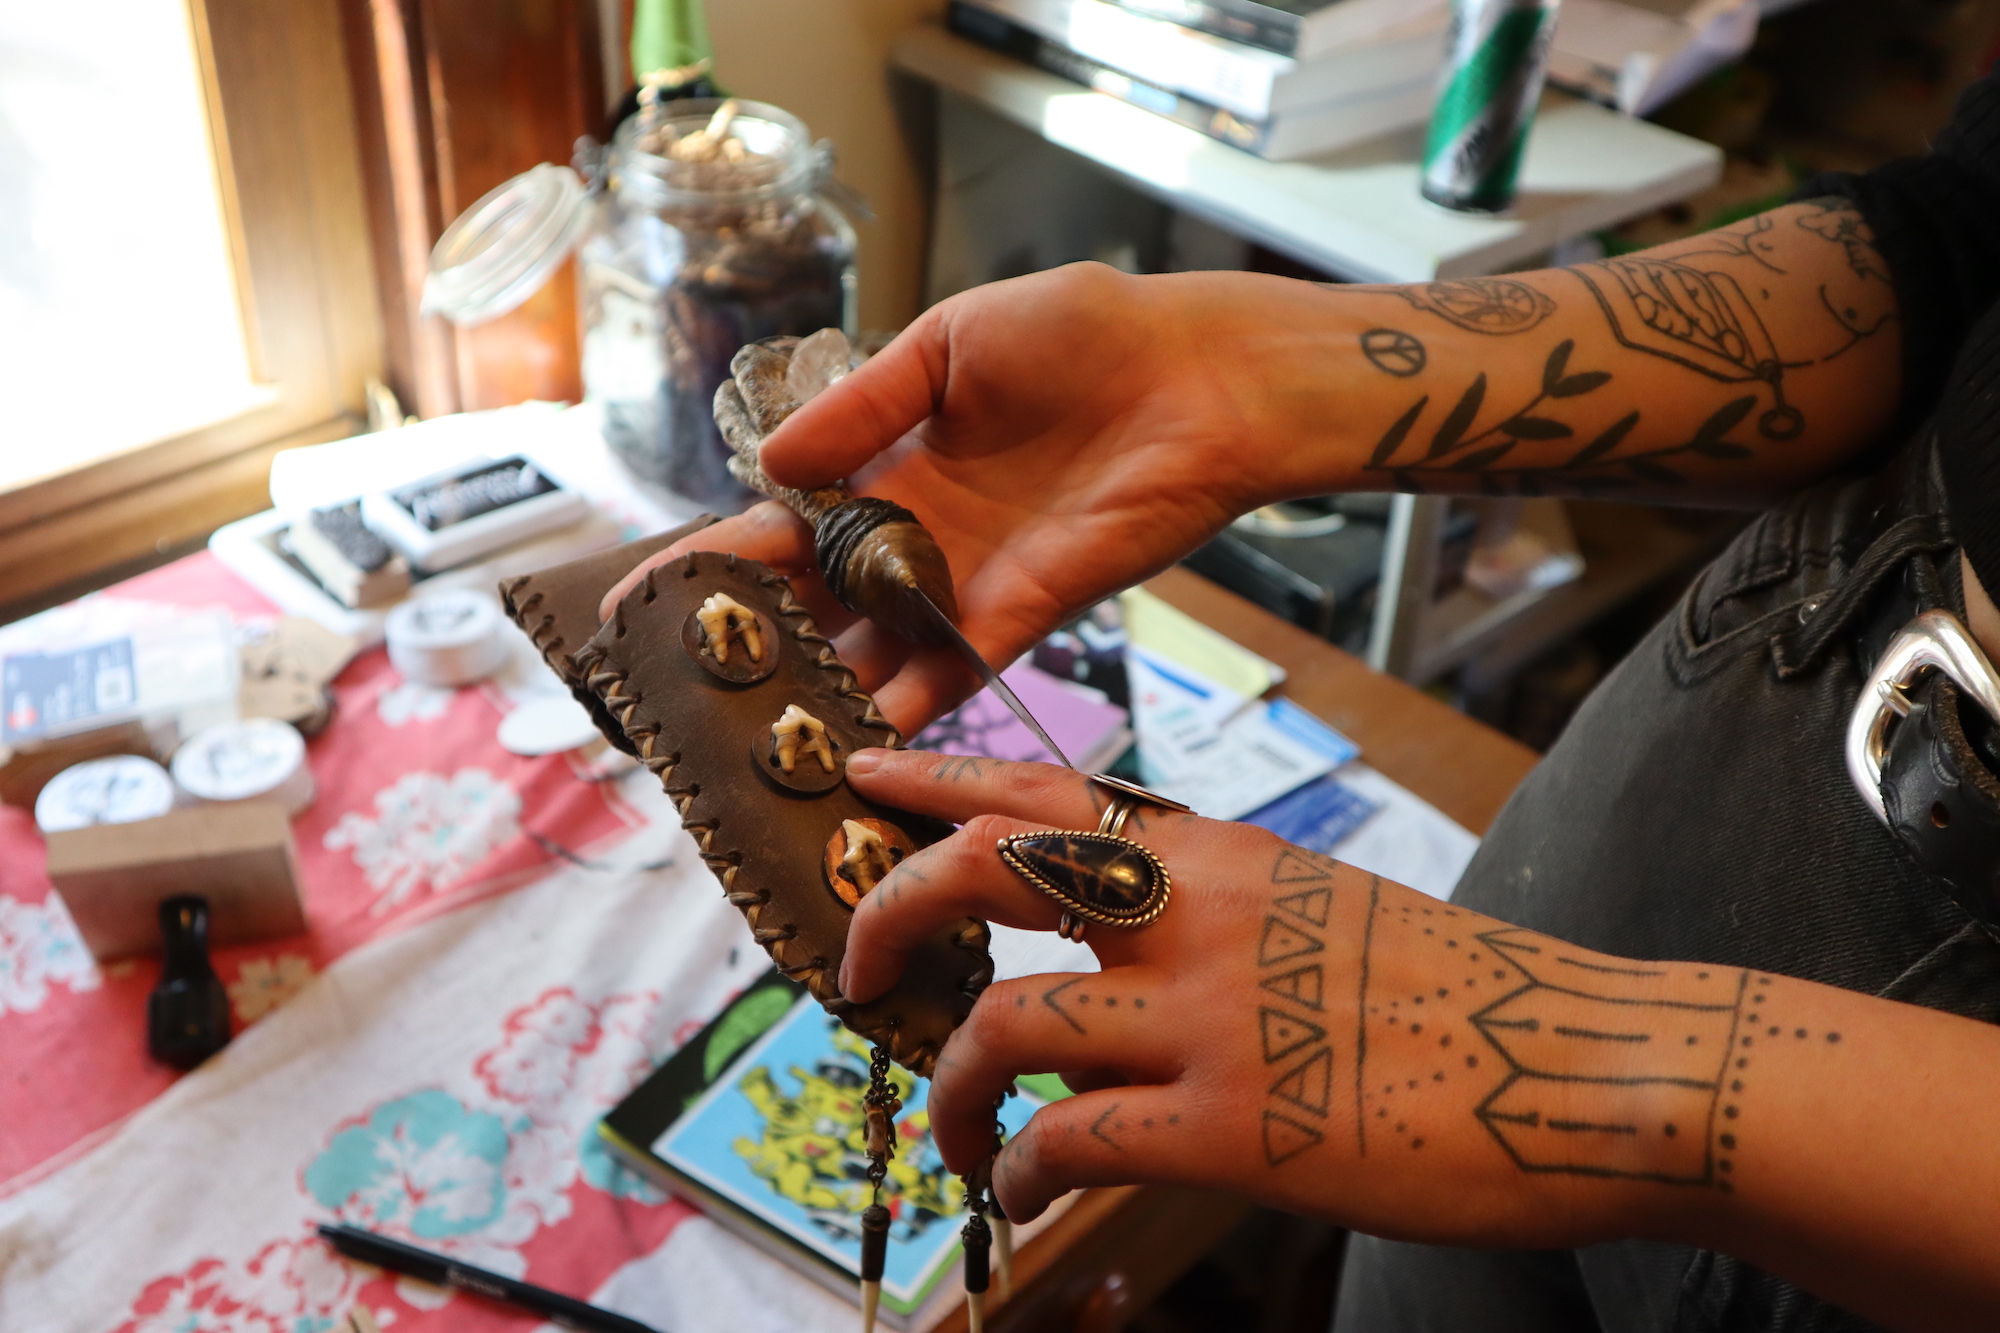 Lisa Lauren, the owner, artist and silversmith of Kettle Black Silver Co., shows a knife sheath she made that's adorned with coyote teeth. (Steven Potter/WPR)